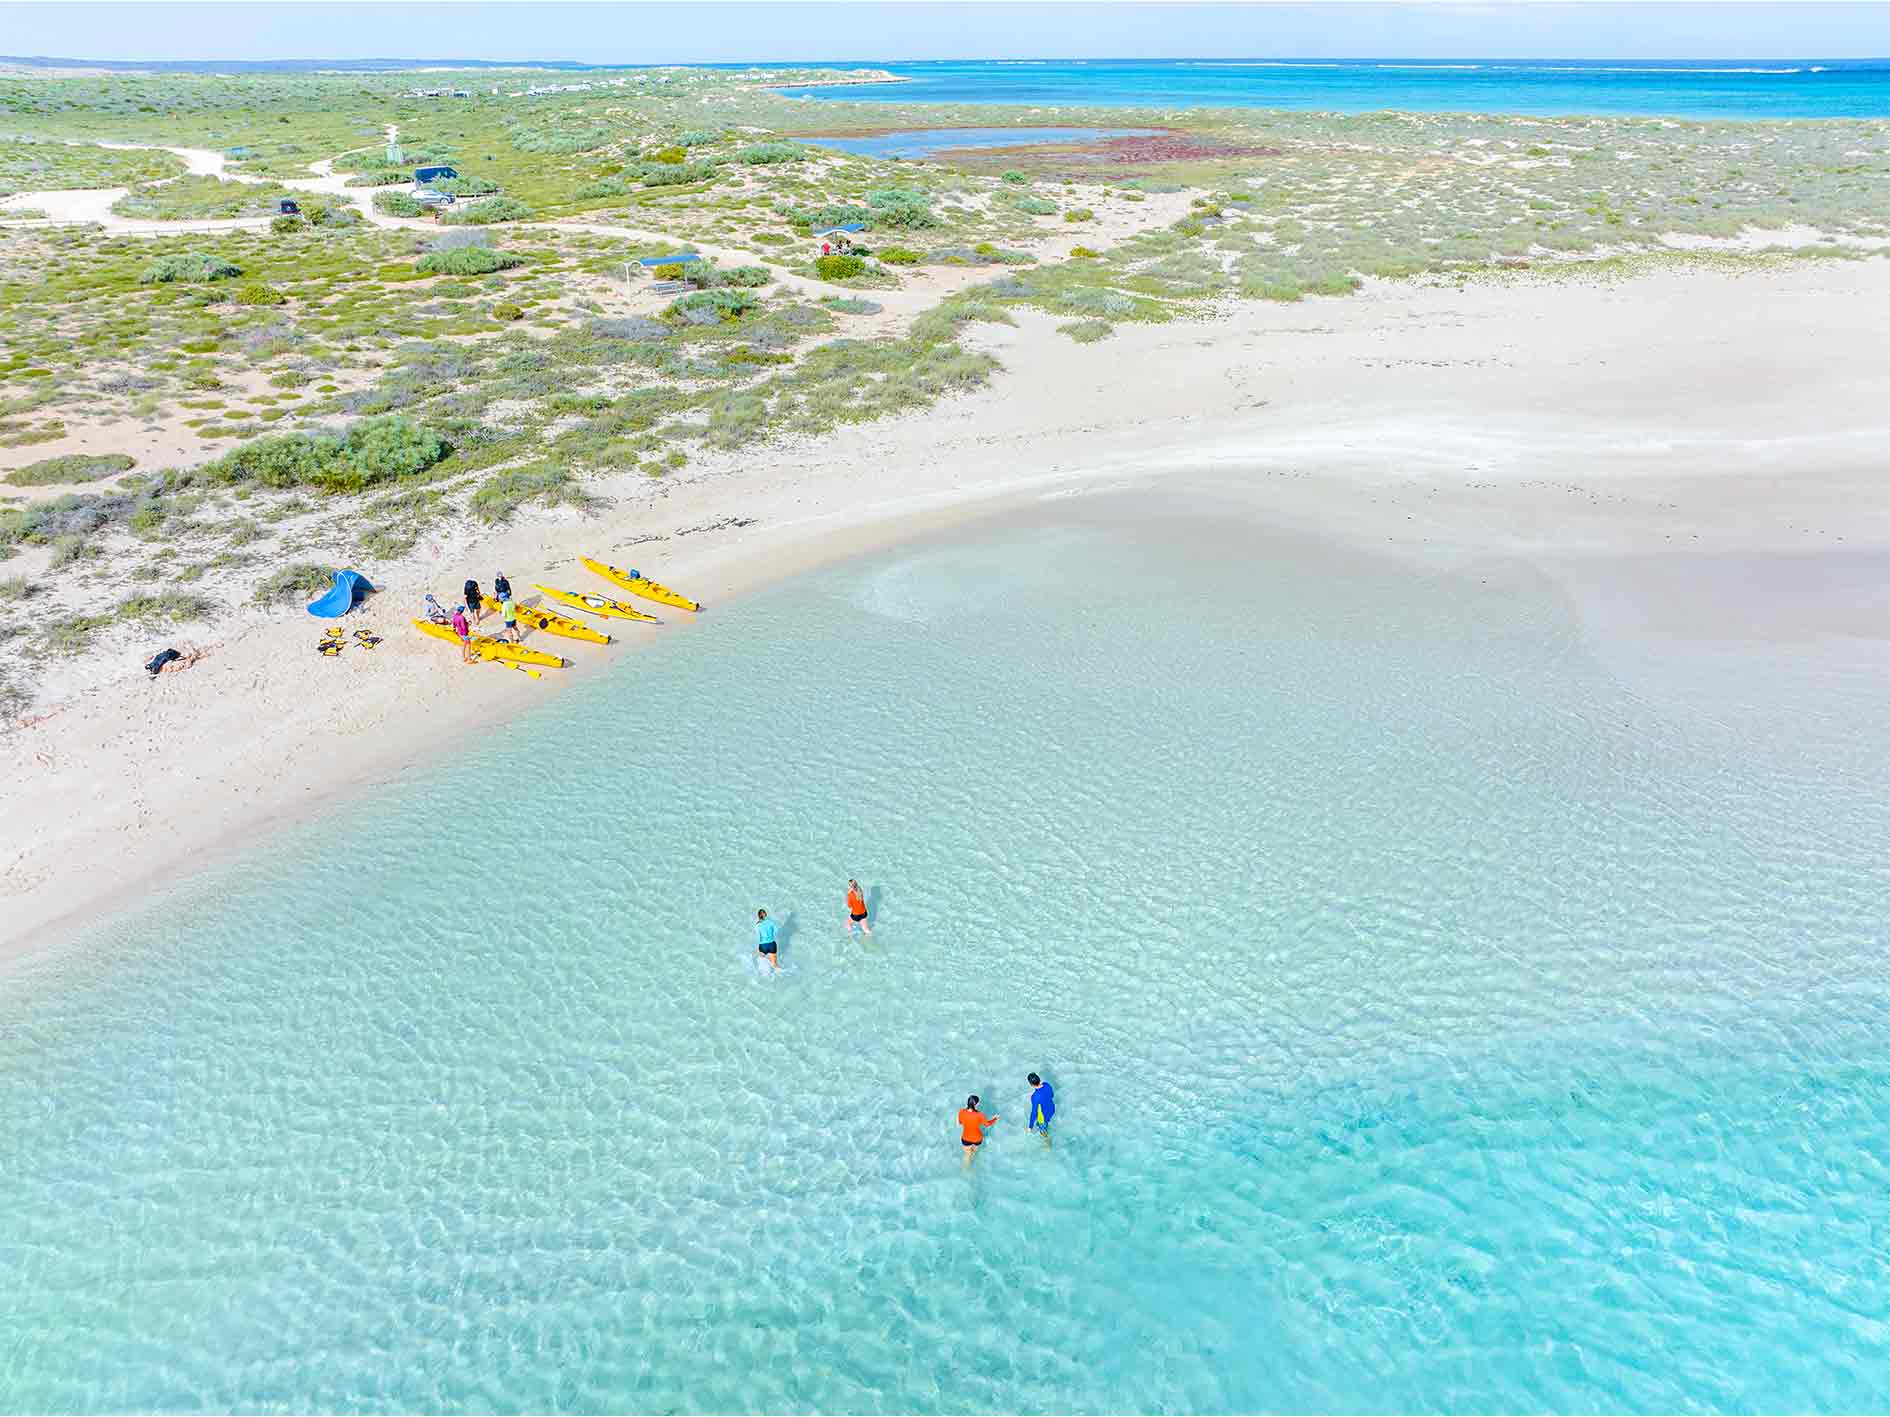 Couple paddle a double sea kayak across turquoise water on overnight sea kayaking, snorkelling, camping tour at Ningaloo Reef, Exmouth, Western Australia